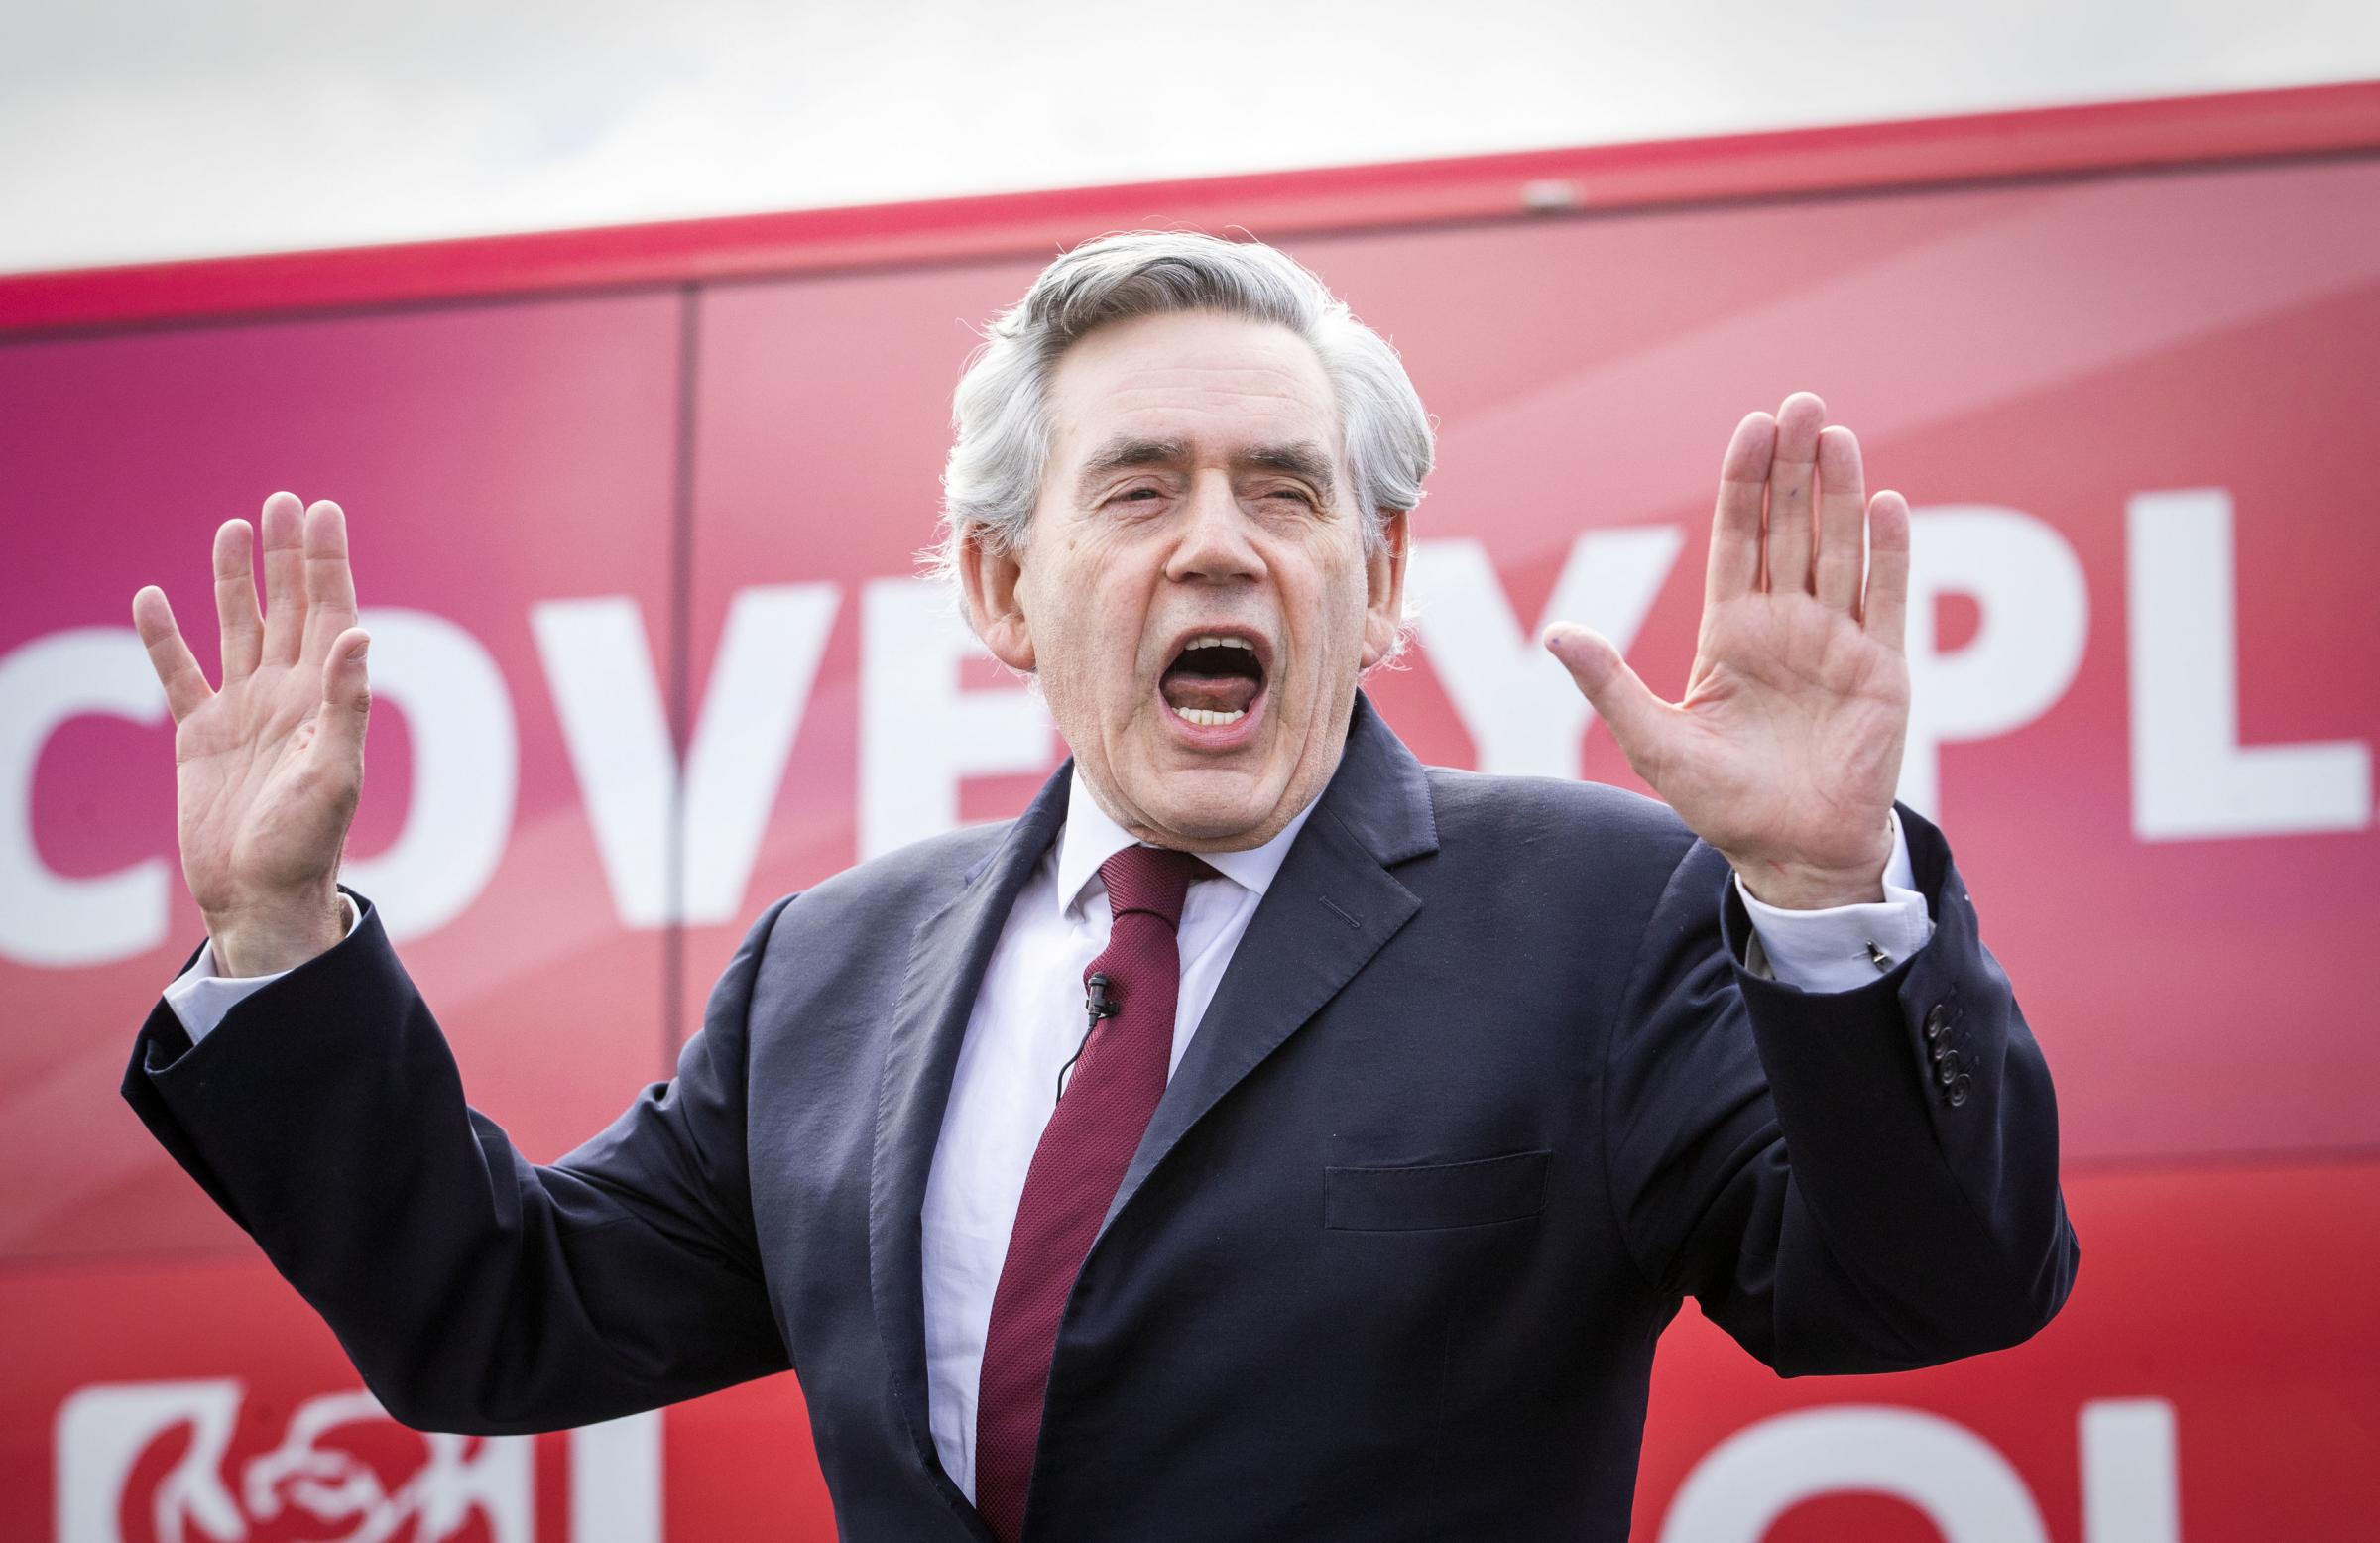 Gordon Brown told to 'apologise to Scots' after attacking SNP government